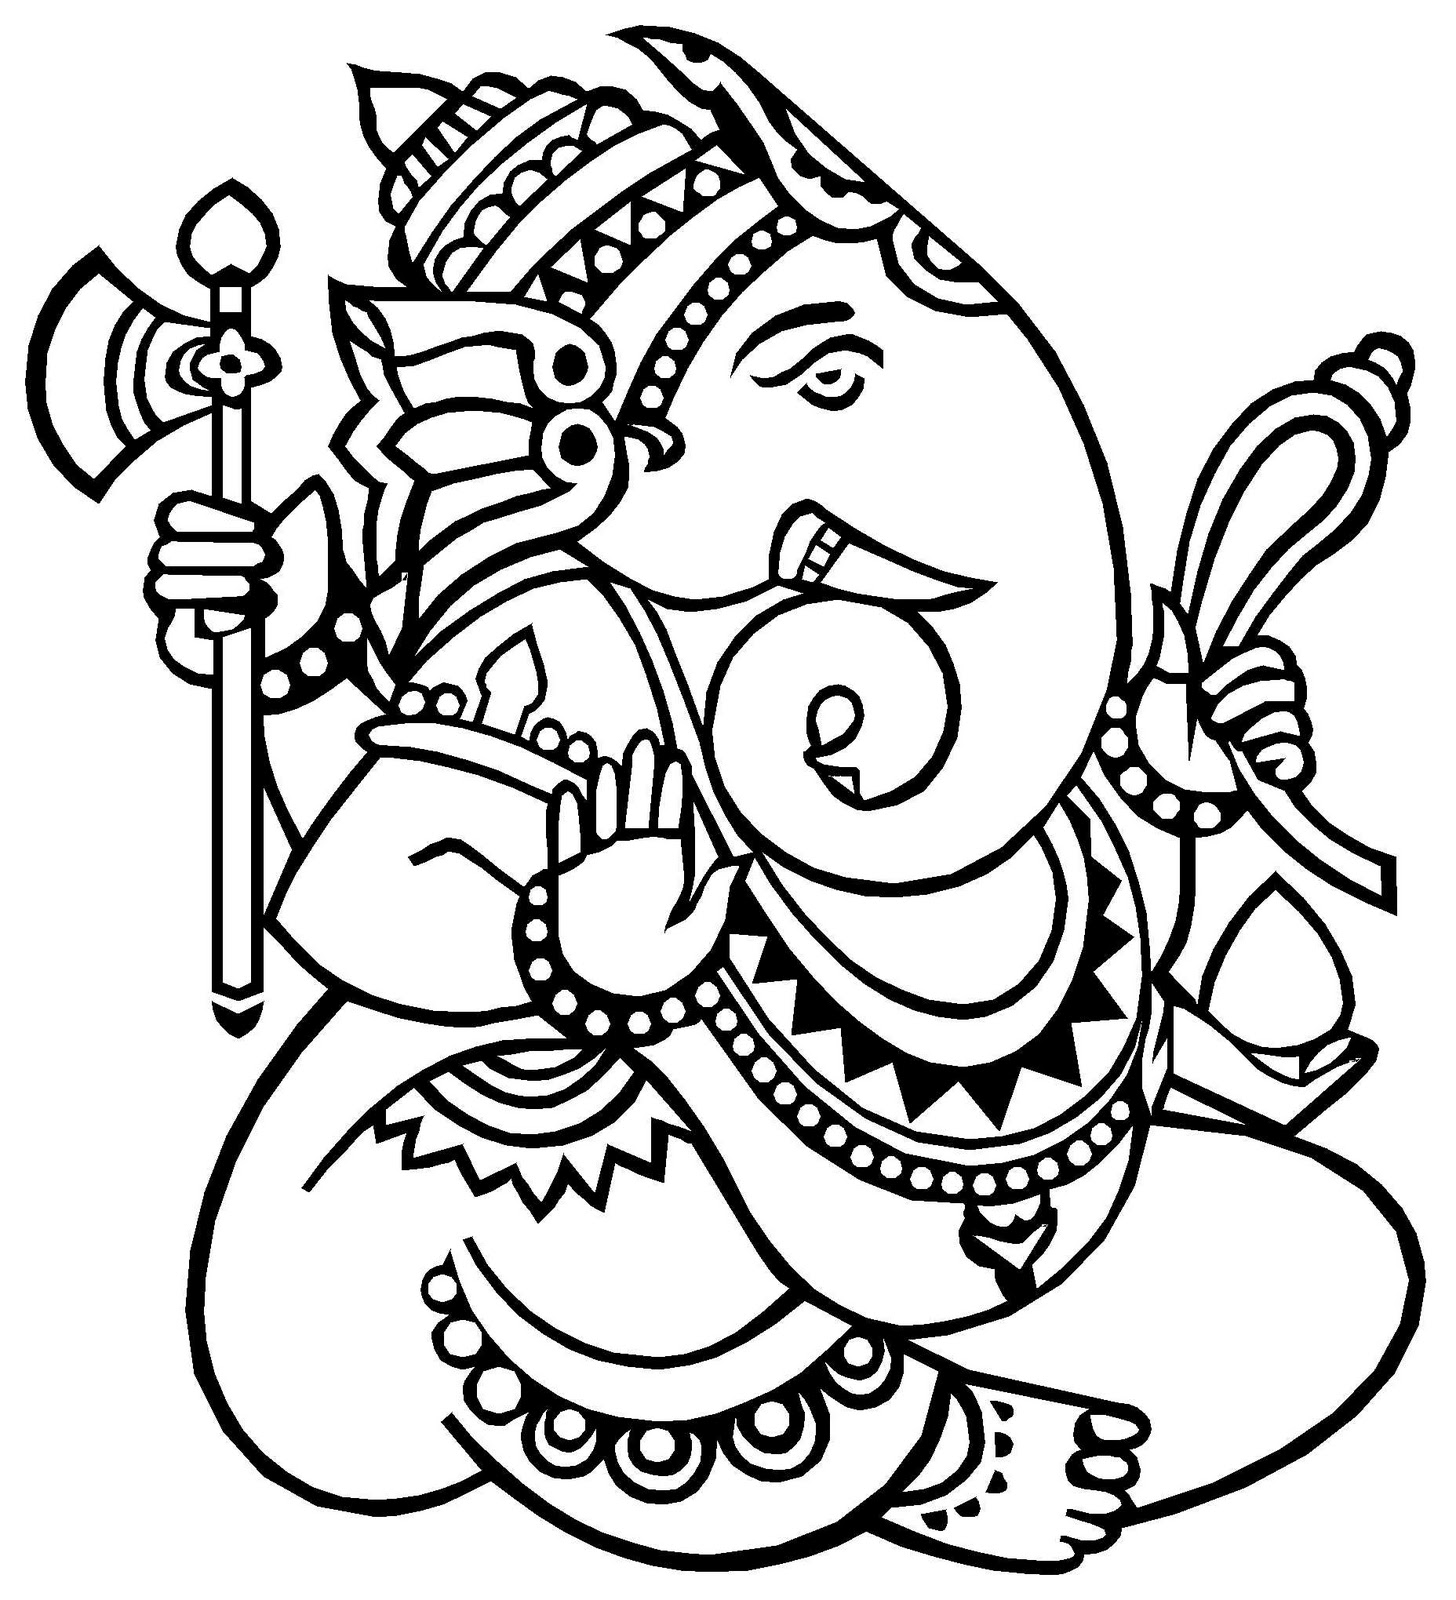 Simple Ganesha Drawing For Kids - Gallery